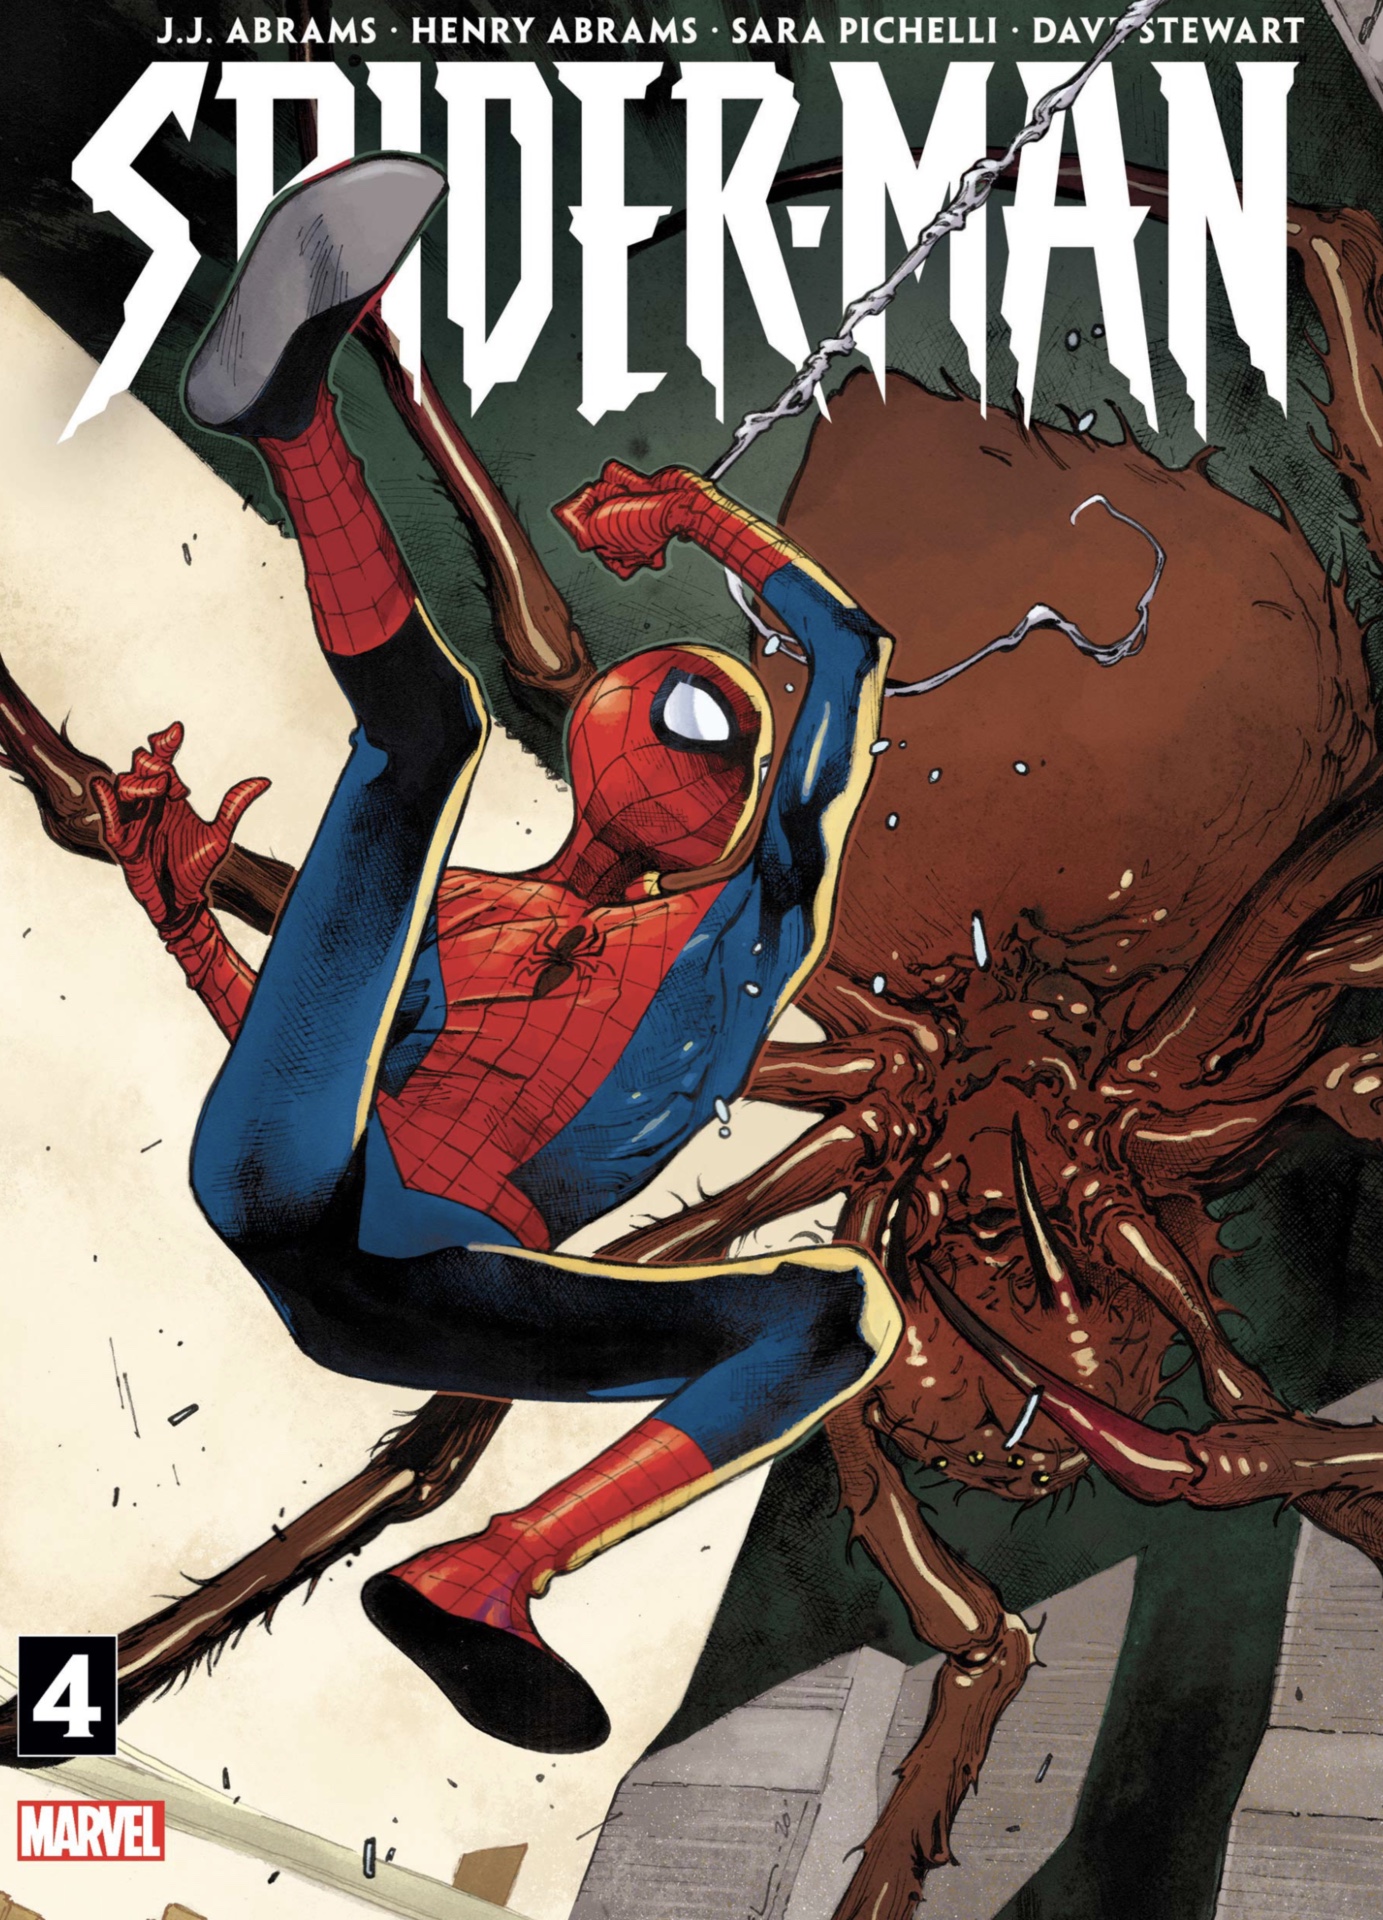 The cover of Spider-Man: Bloodlines #4